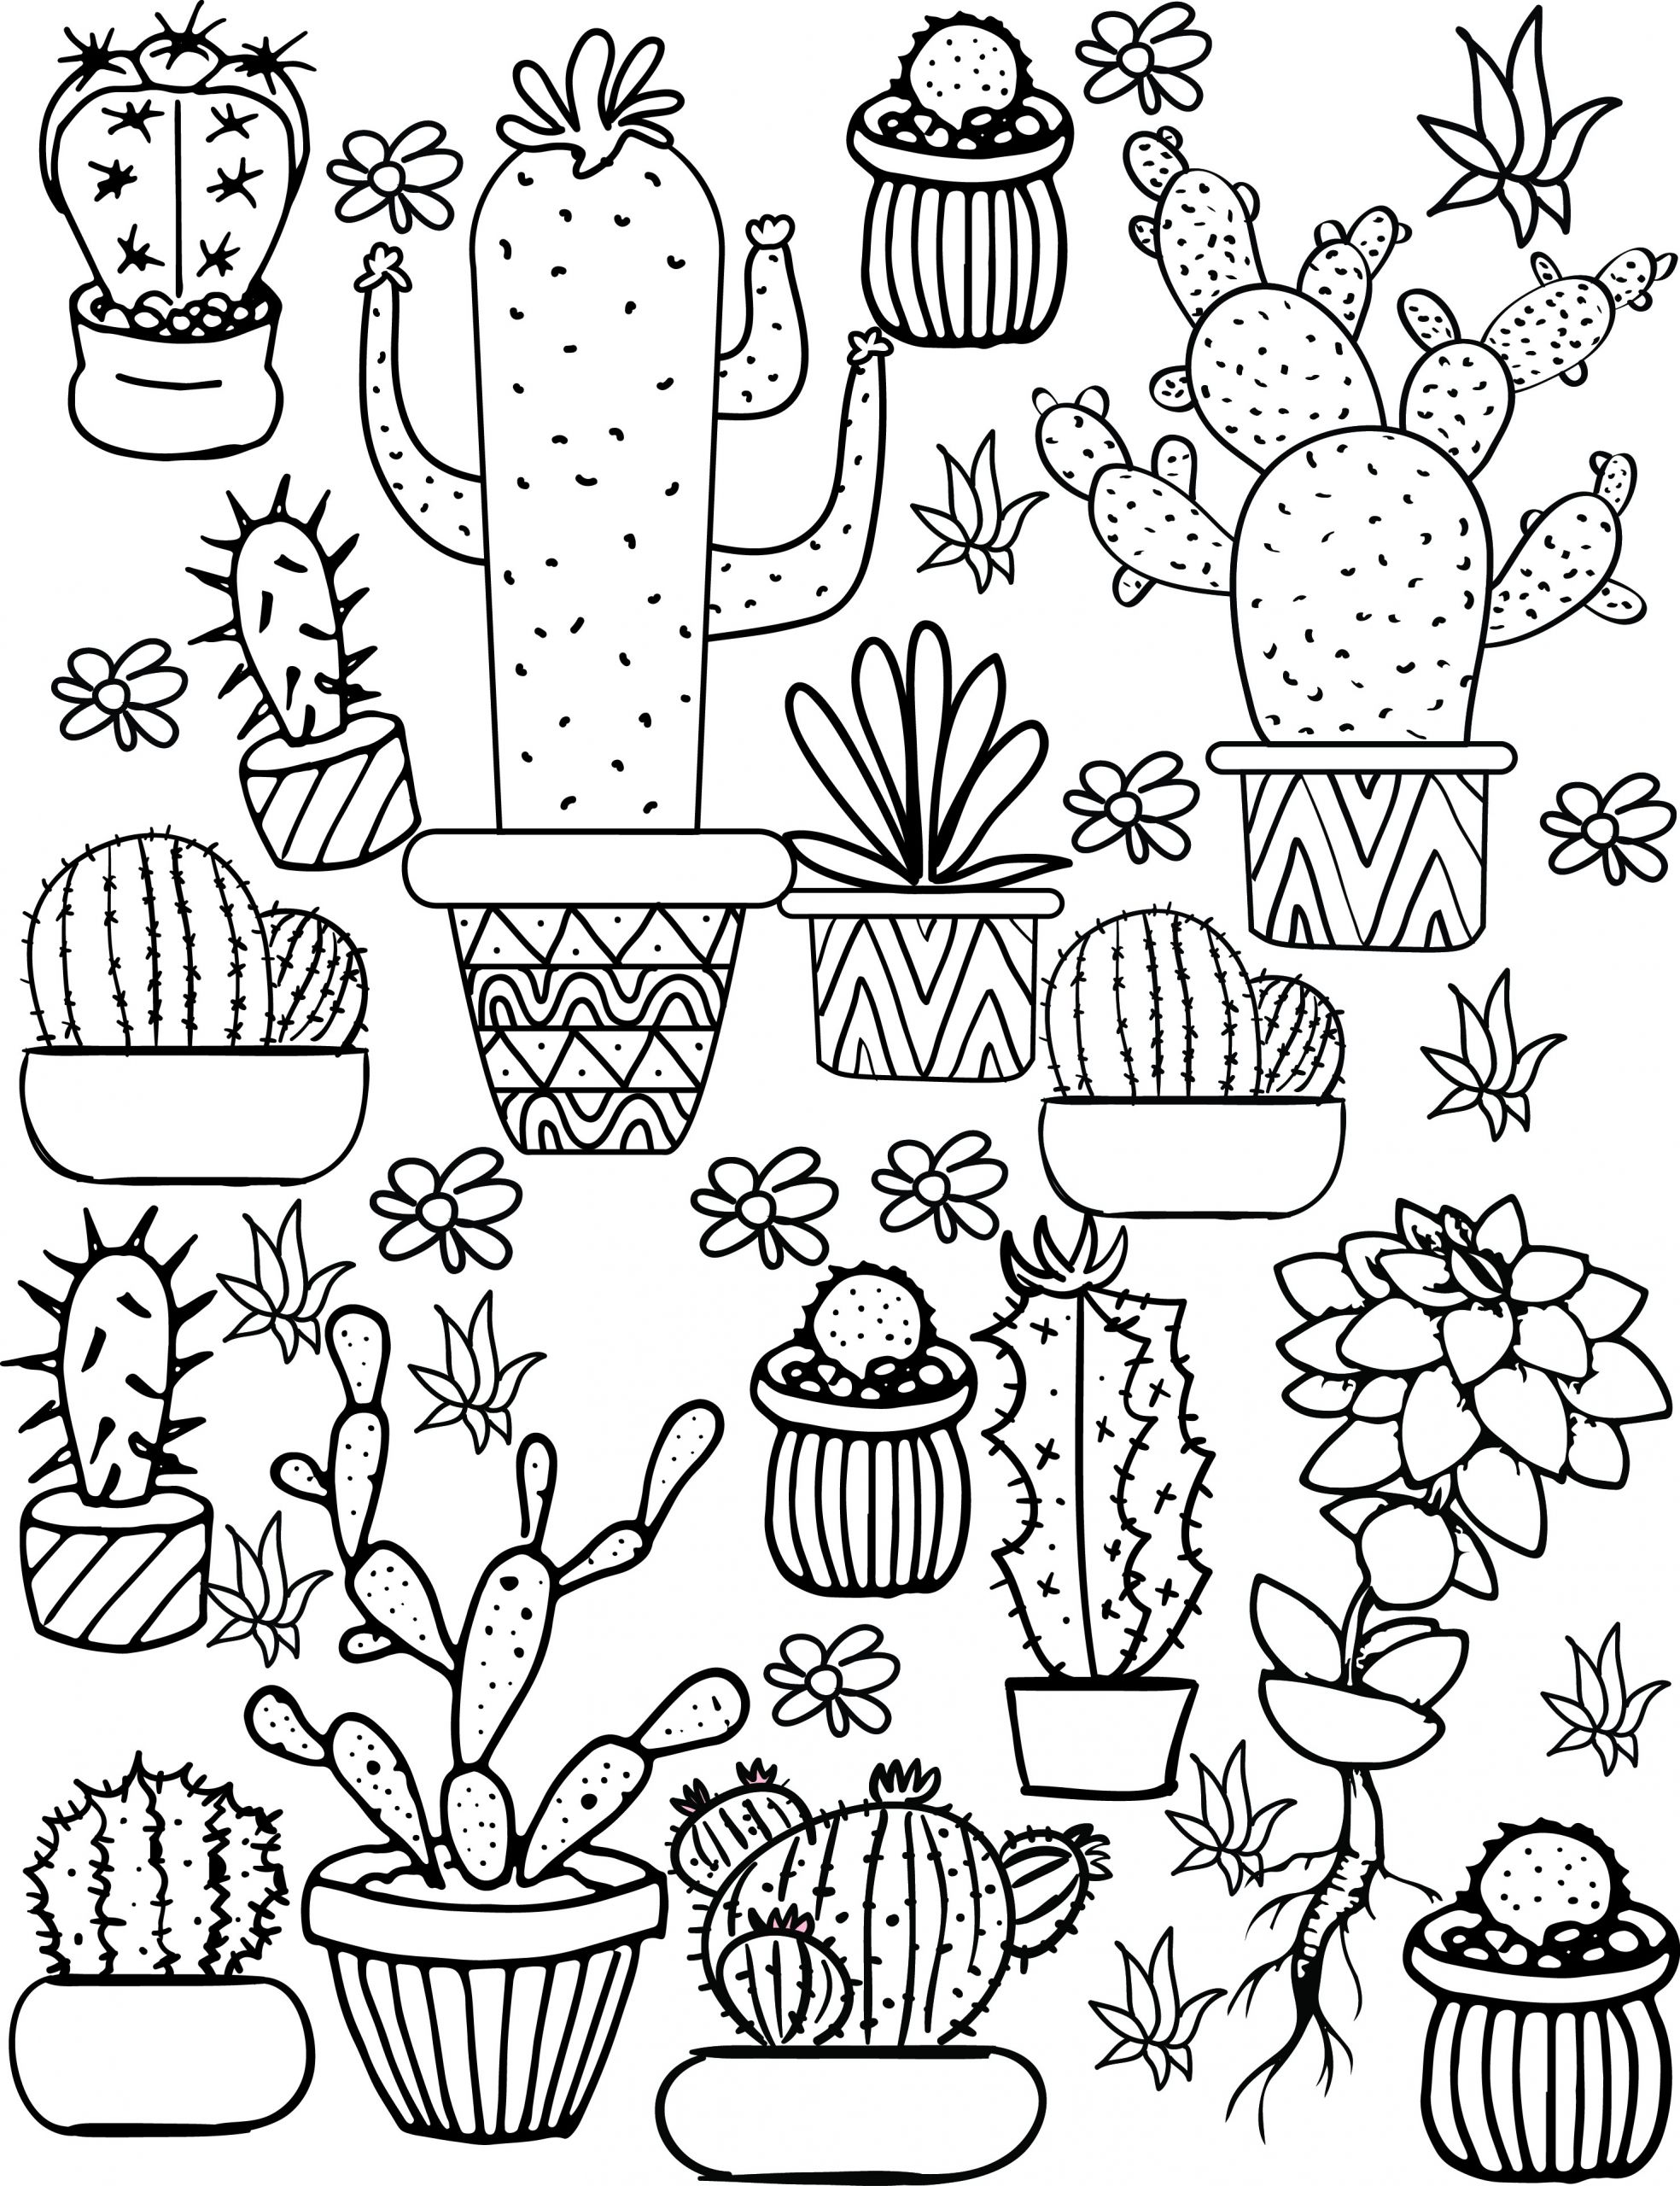 Cute Coloring Sheets For Girls
 Cute Coloring Pages Best Coloring Pages For Kids